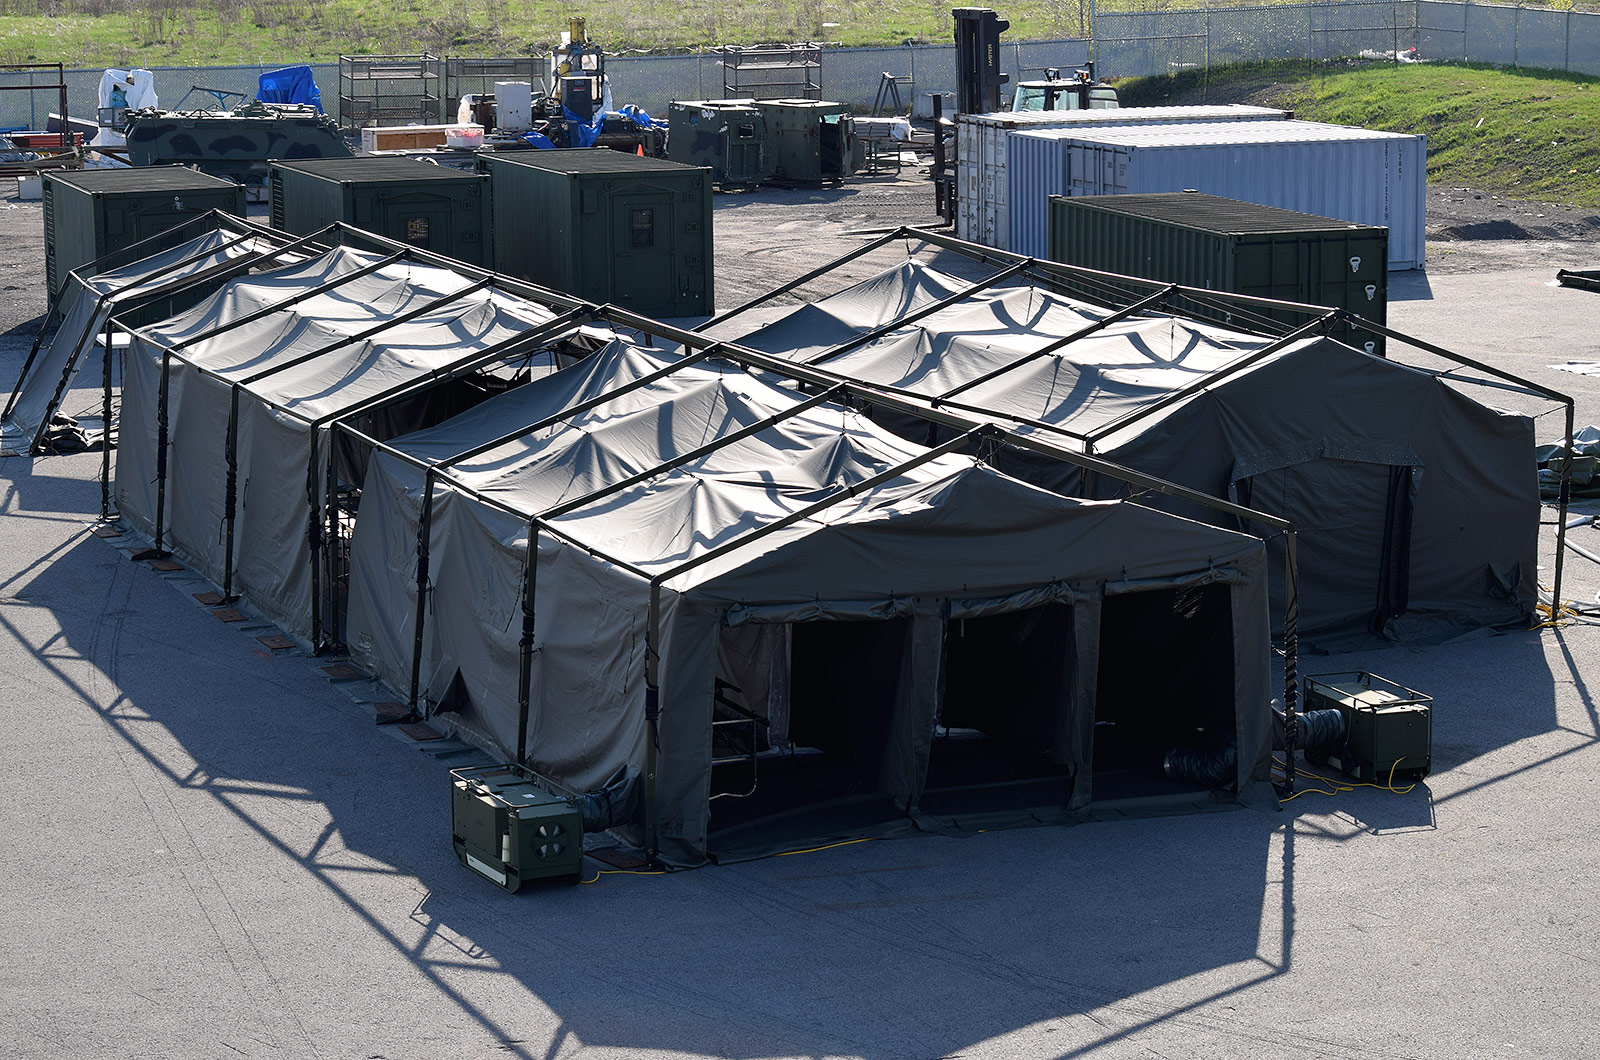 CBRN Personnel and Casualty Decontamination Shelters